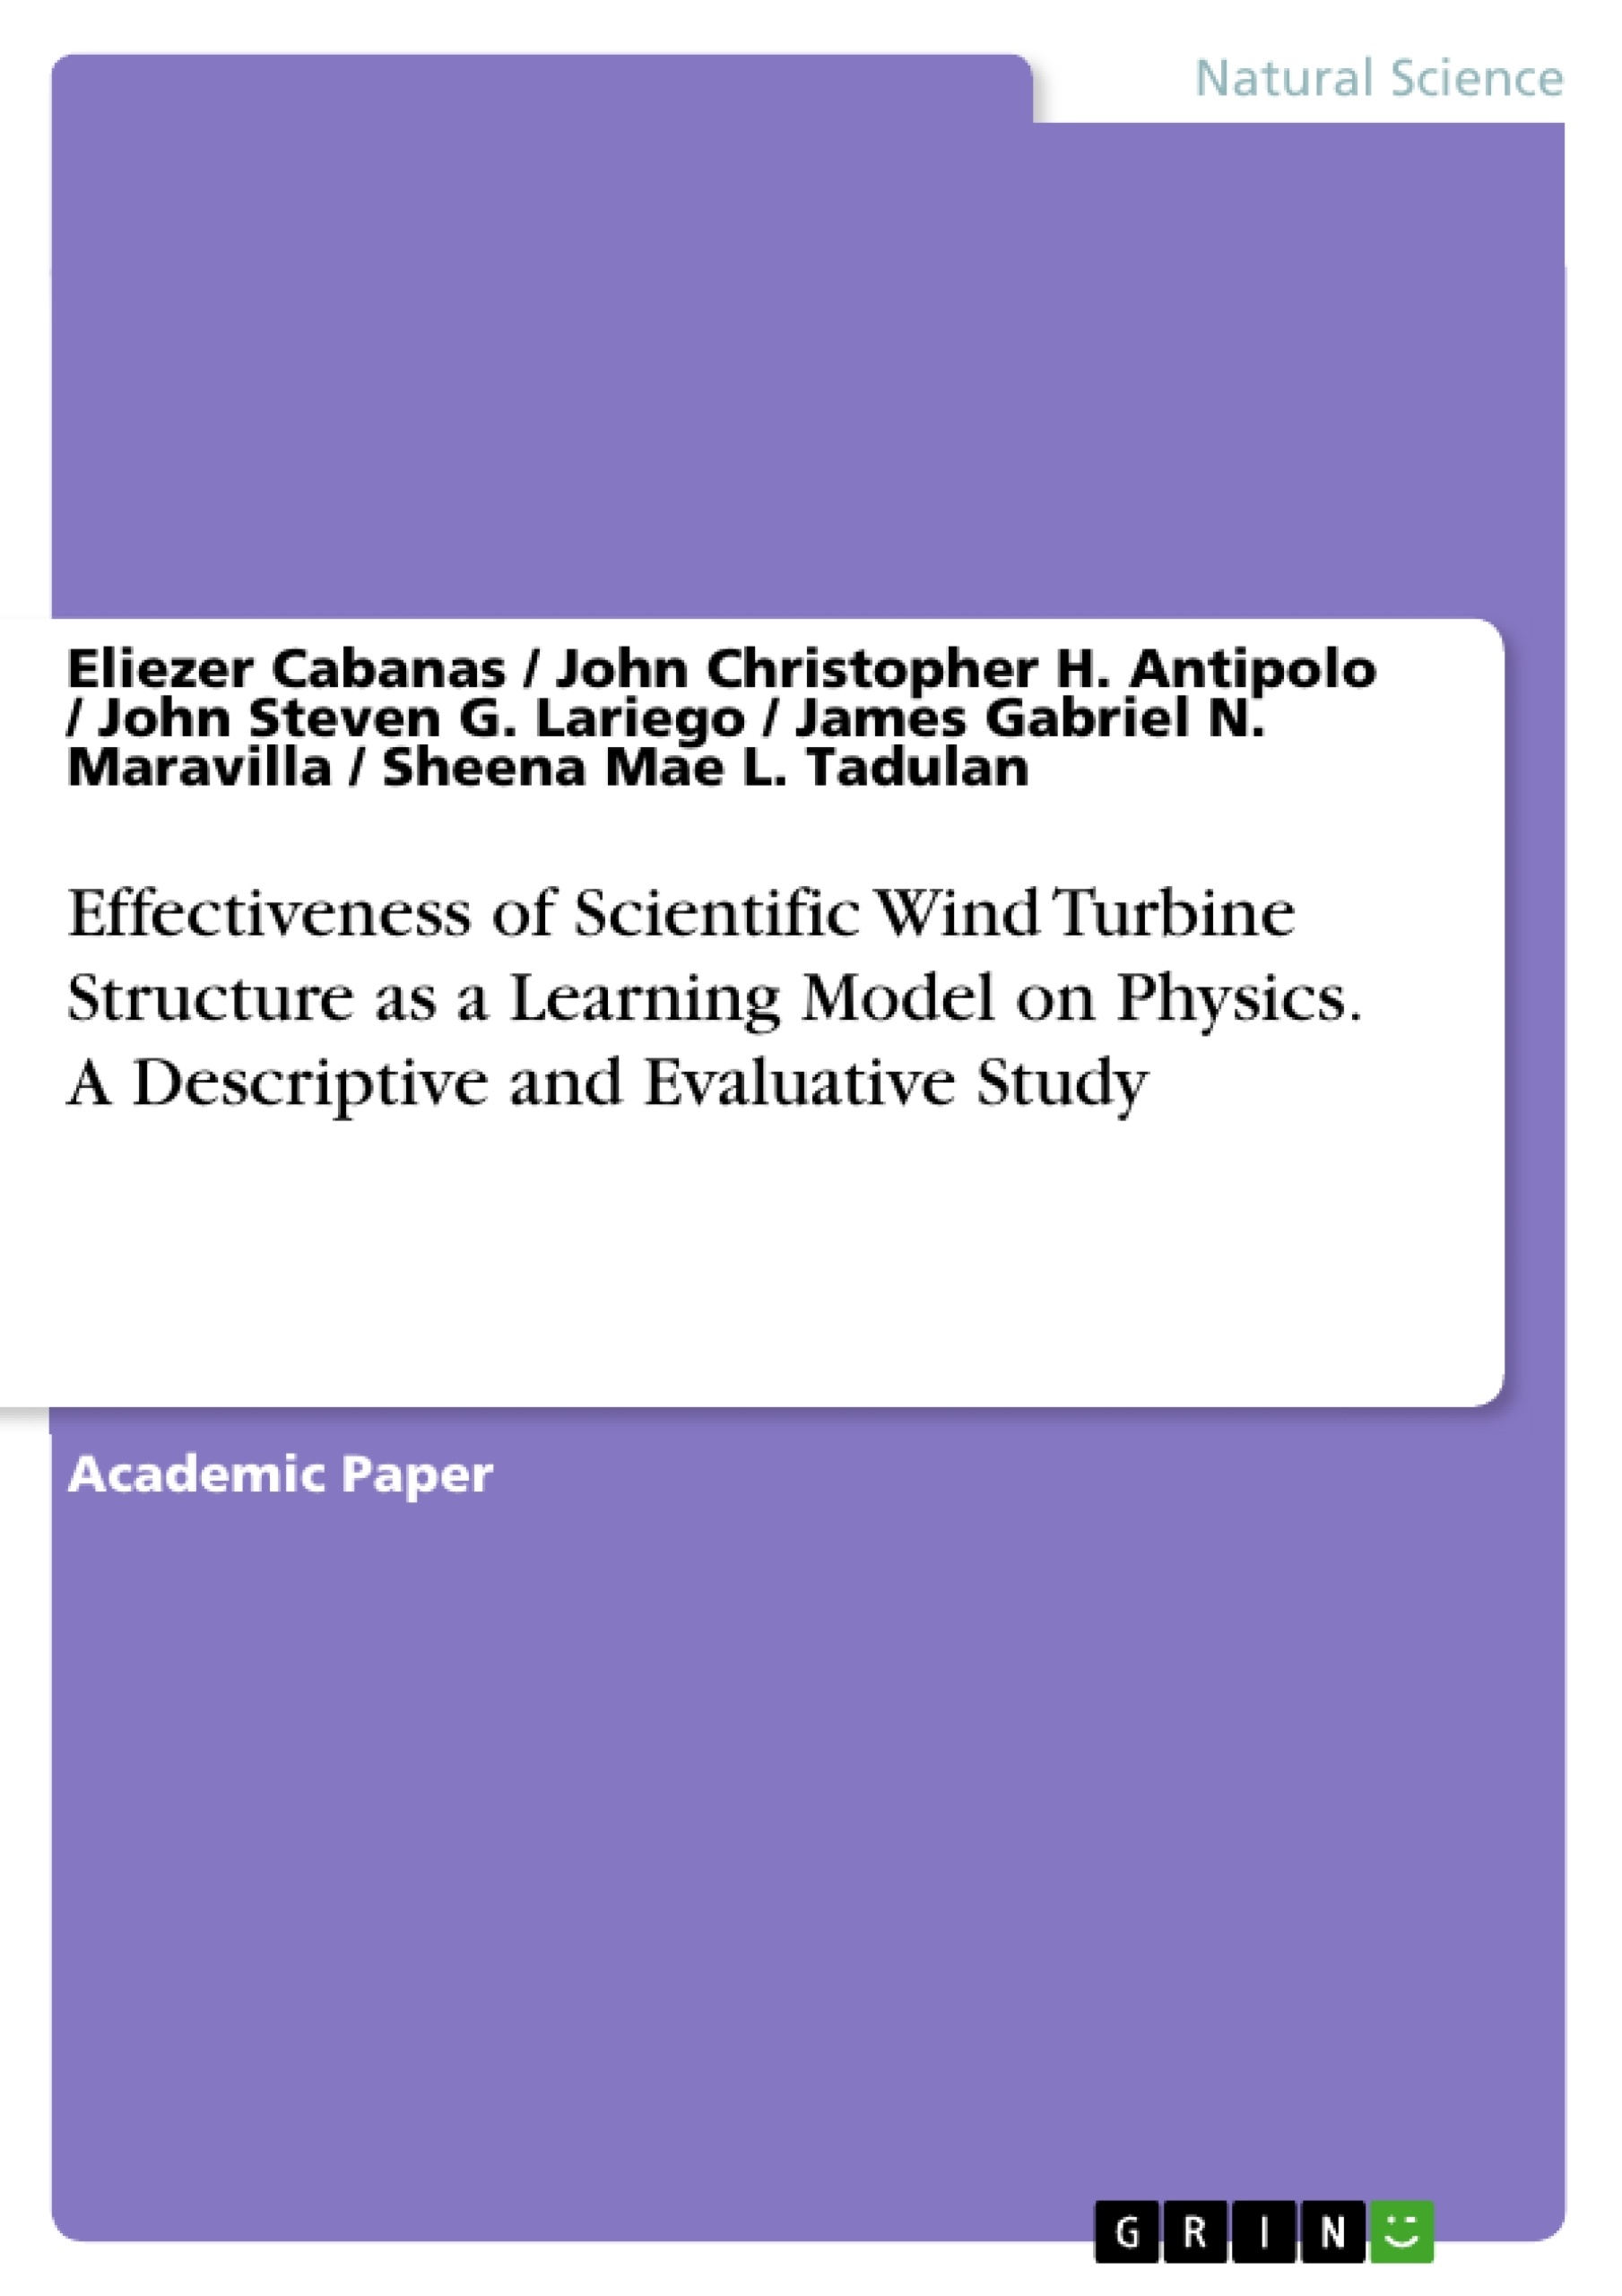 Title: Effectiveness of Scientific Wind Turbine Structure as a Learning Model on Physics. A Descriptive and Evaluative Study